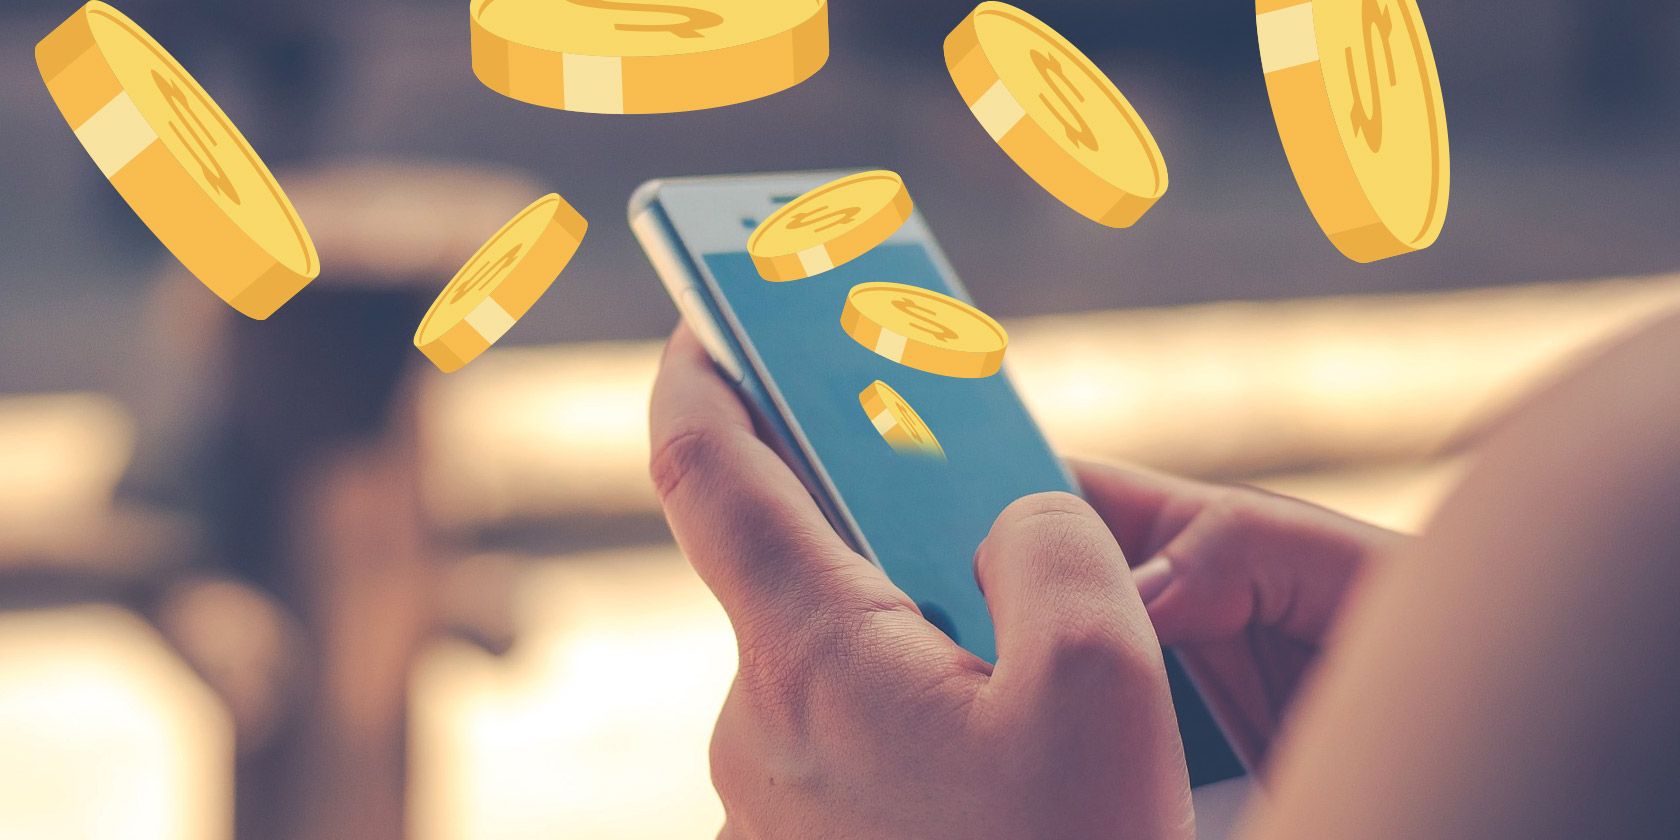 12 Ways to Earn Extra Money With Your Phone